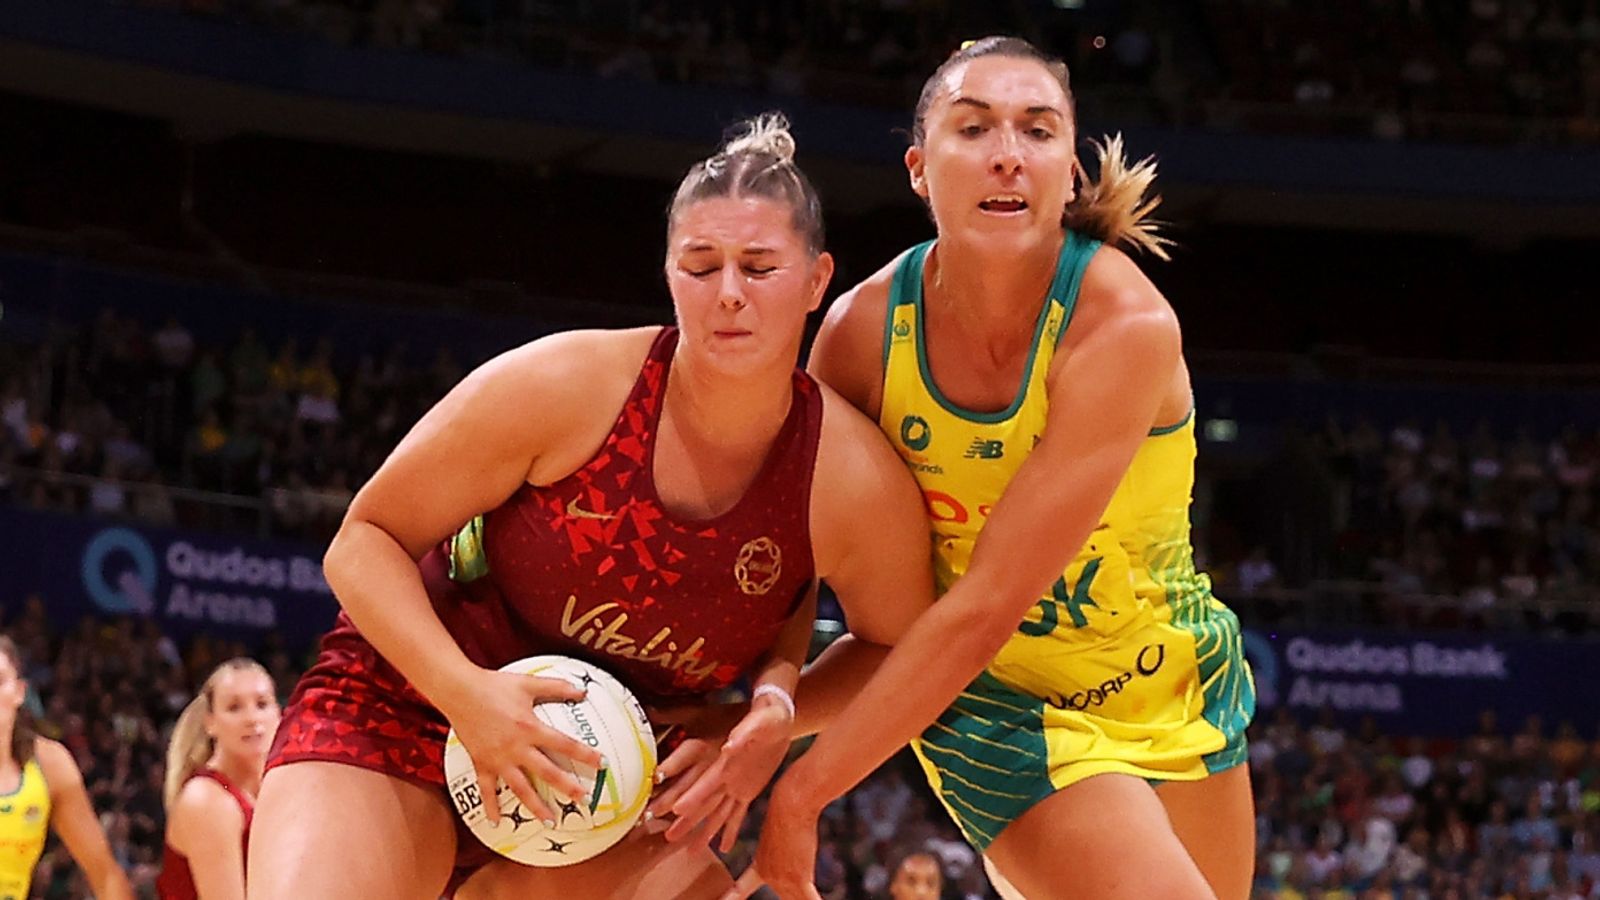 England lose series after defeat in second Test against Australian Diamonds | Netball News